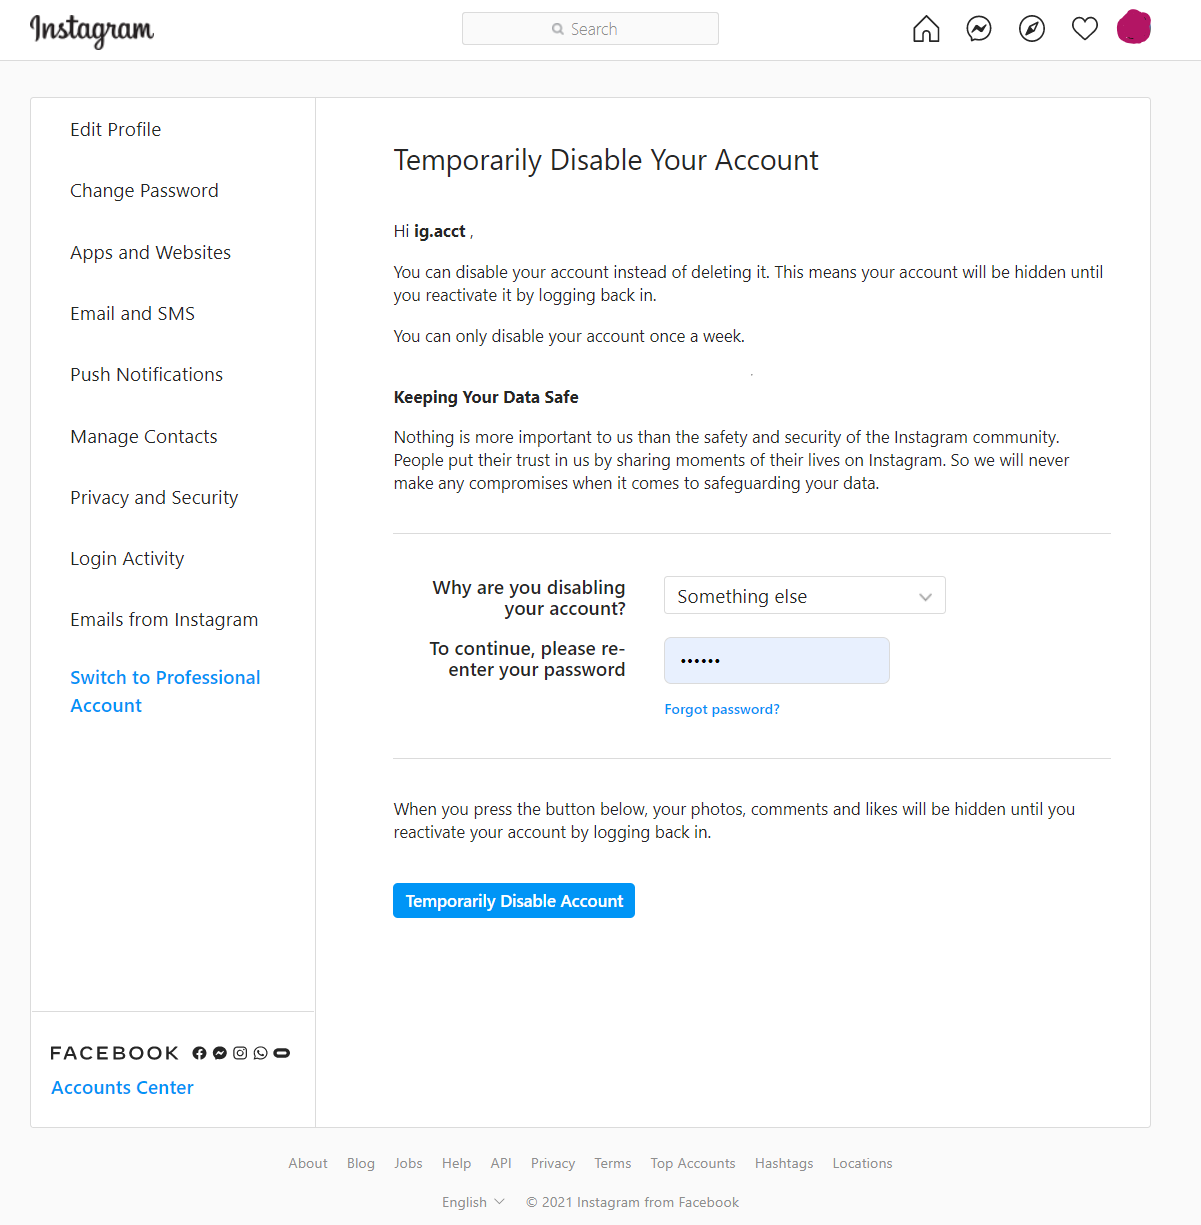 Temporarily Disable Your Account